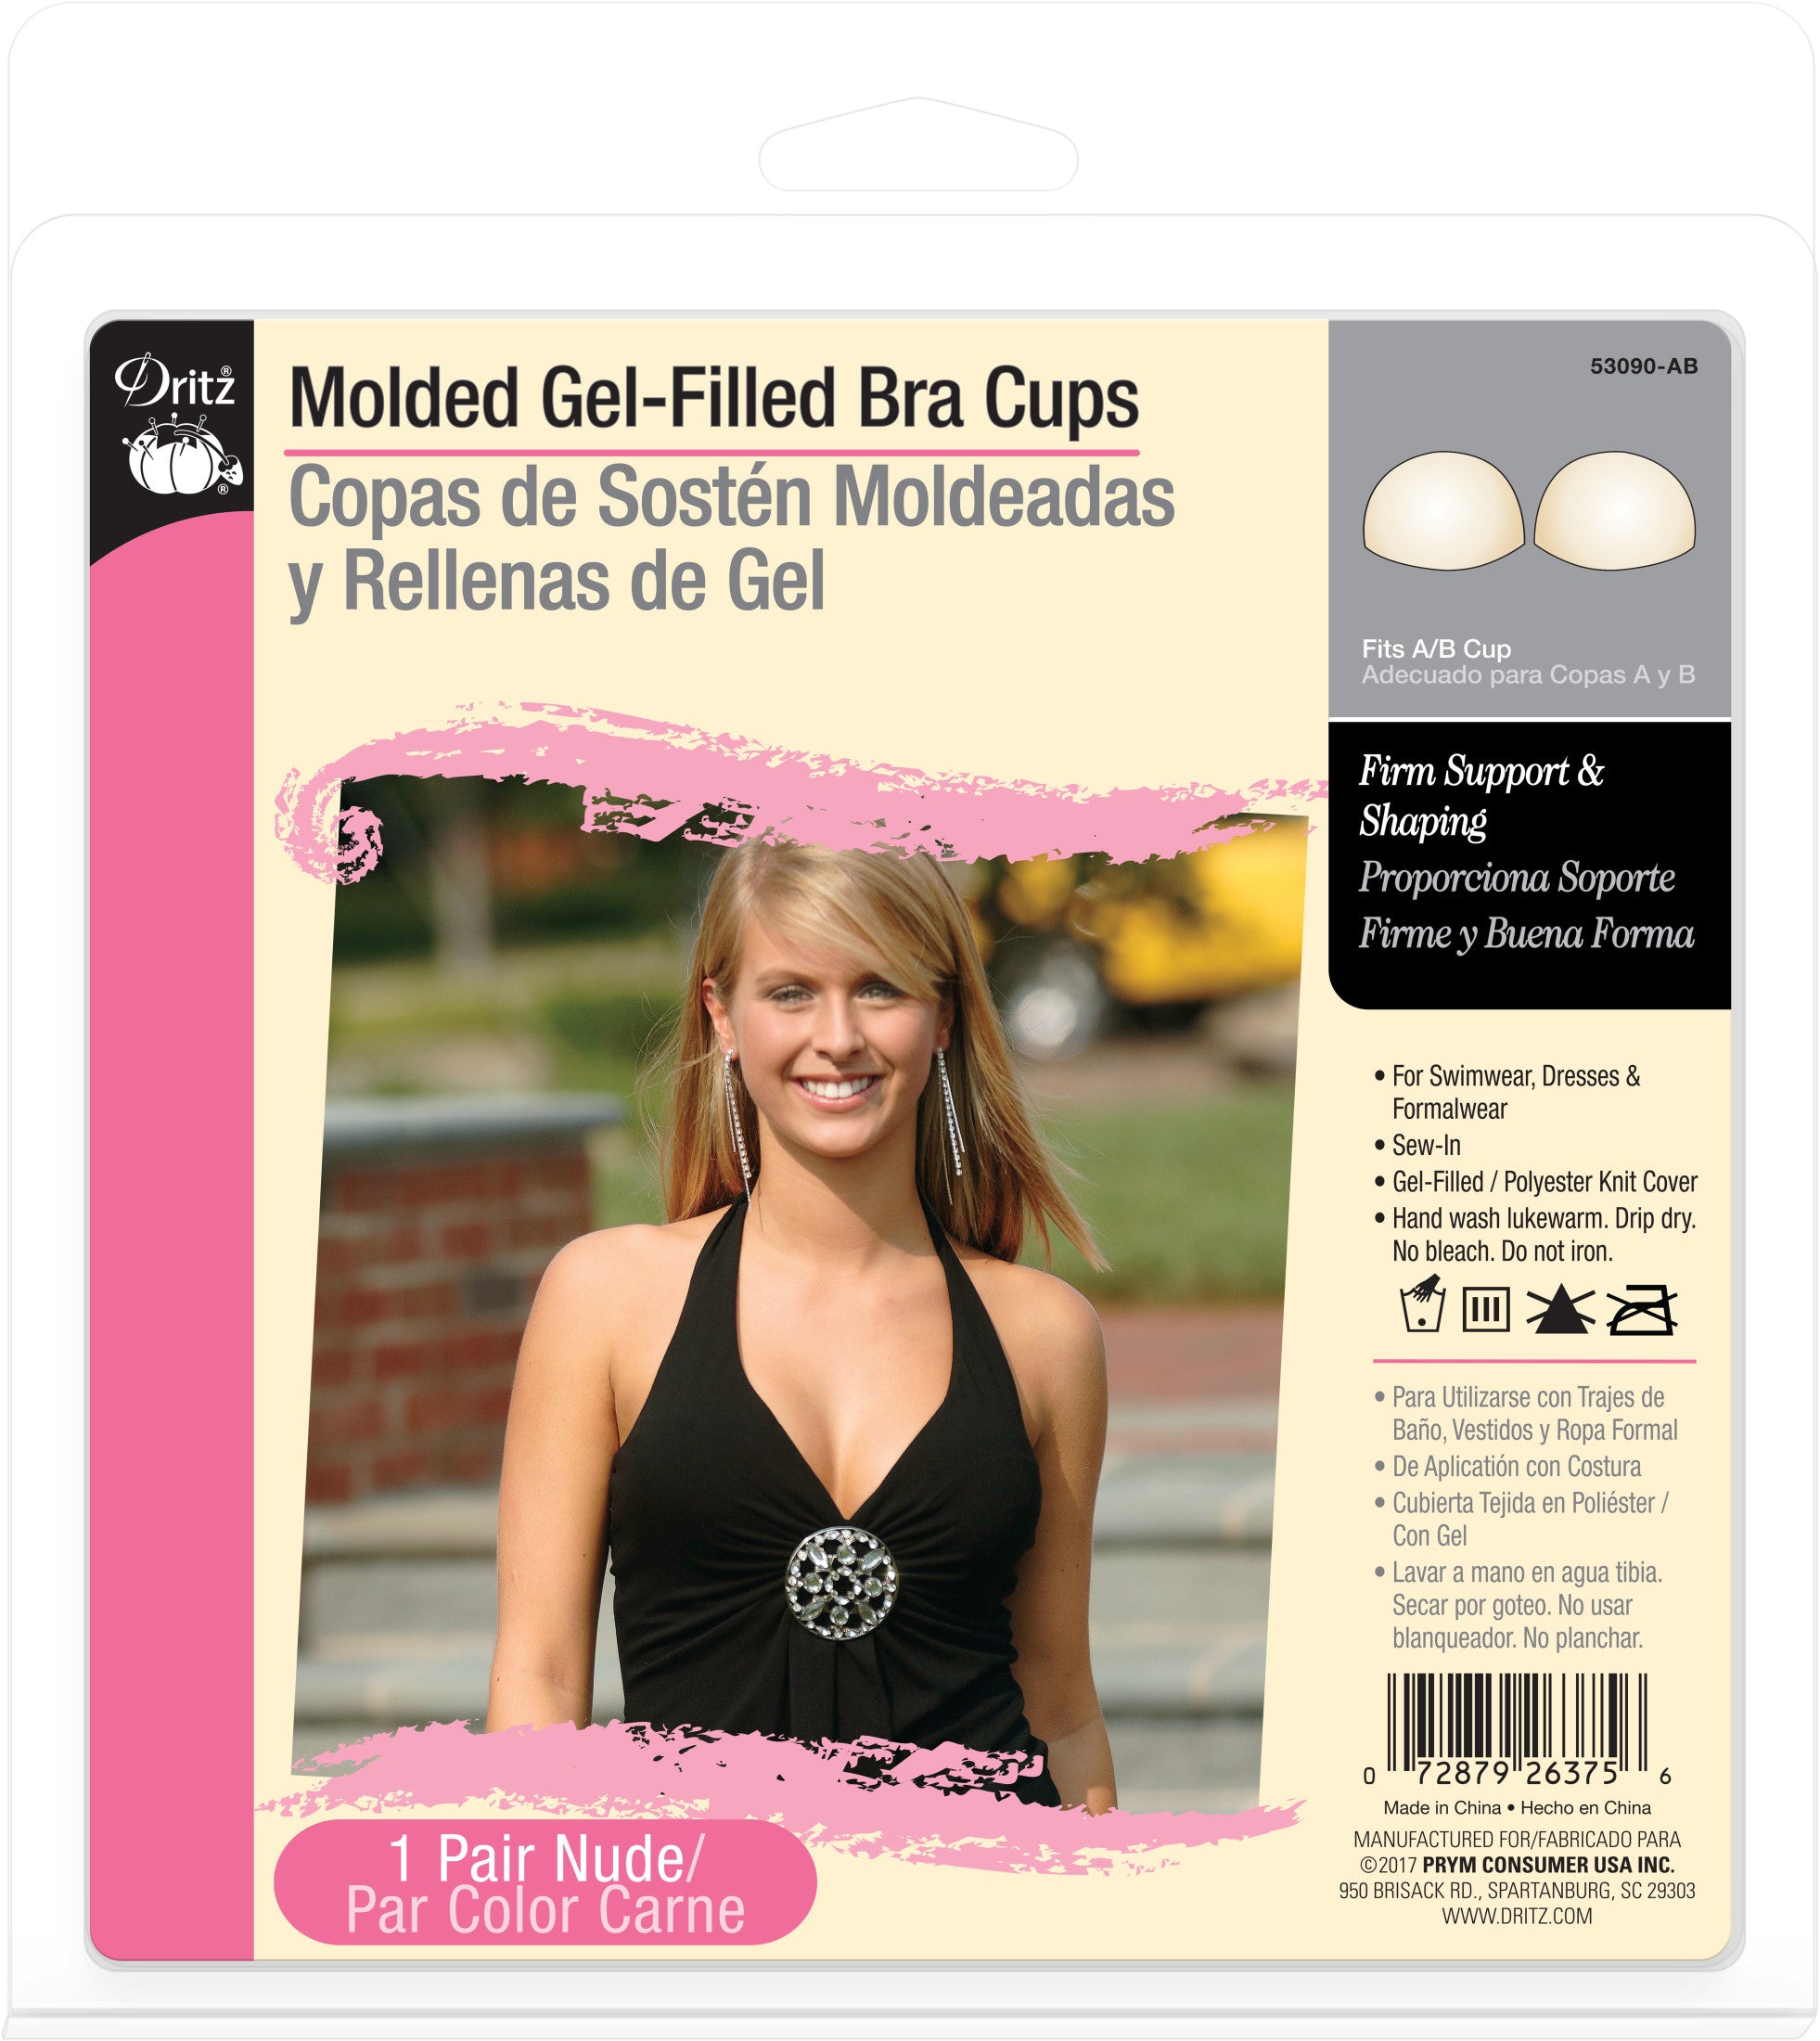 The Lift Up Bra Trio (3 pack)